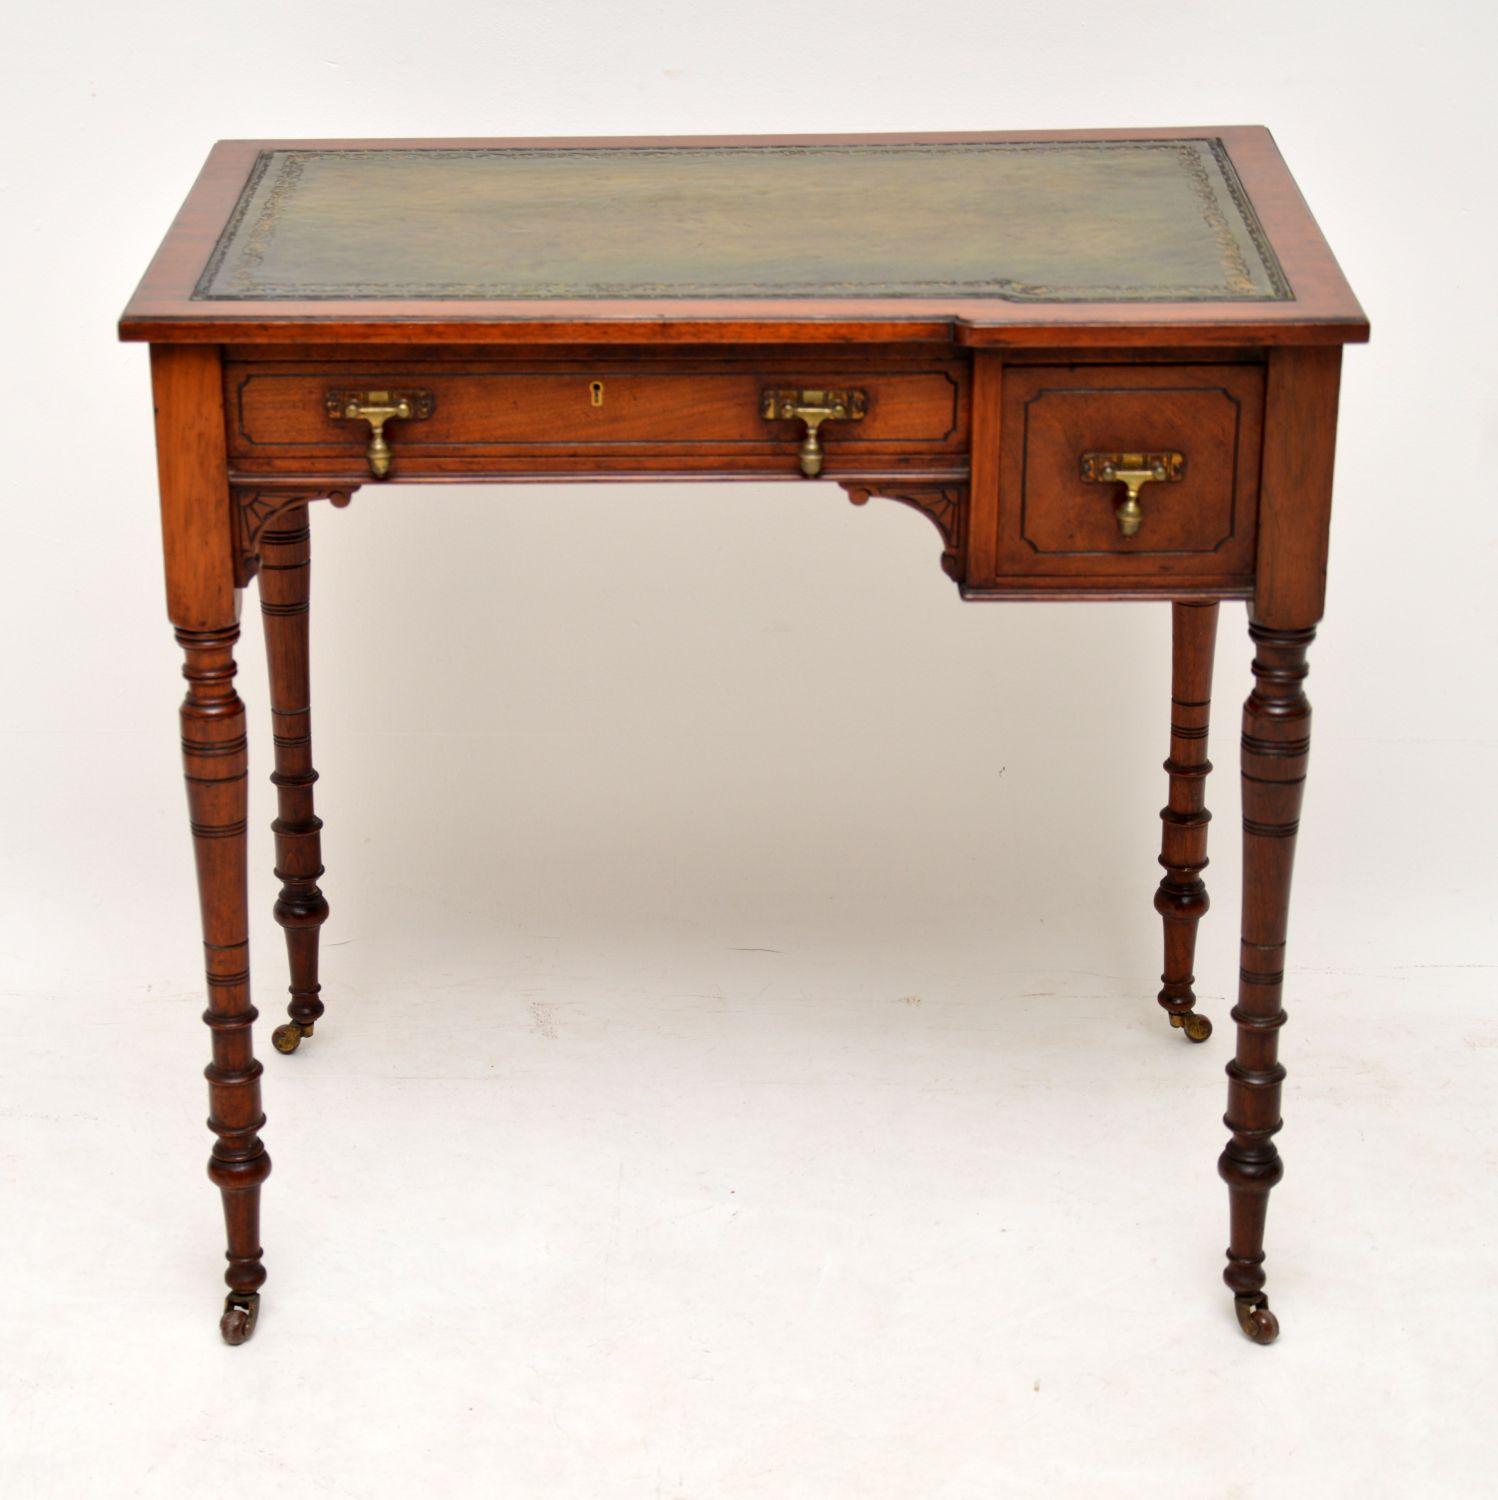 Fine quality small antique solid walnut desk in excellent original condition dating from circa 1880s period. The back is finished and polished, so it’s free standing. This desk has some wonderful features, including a beautifully fitted out right